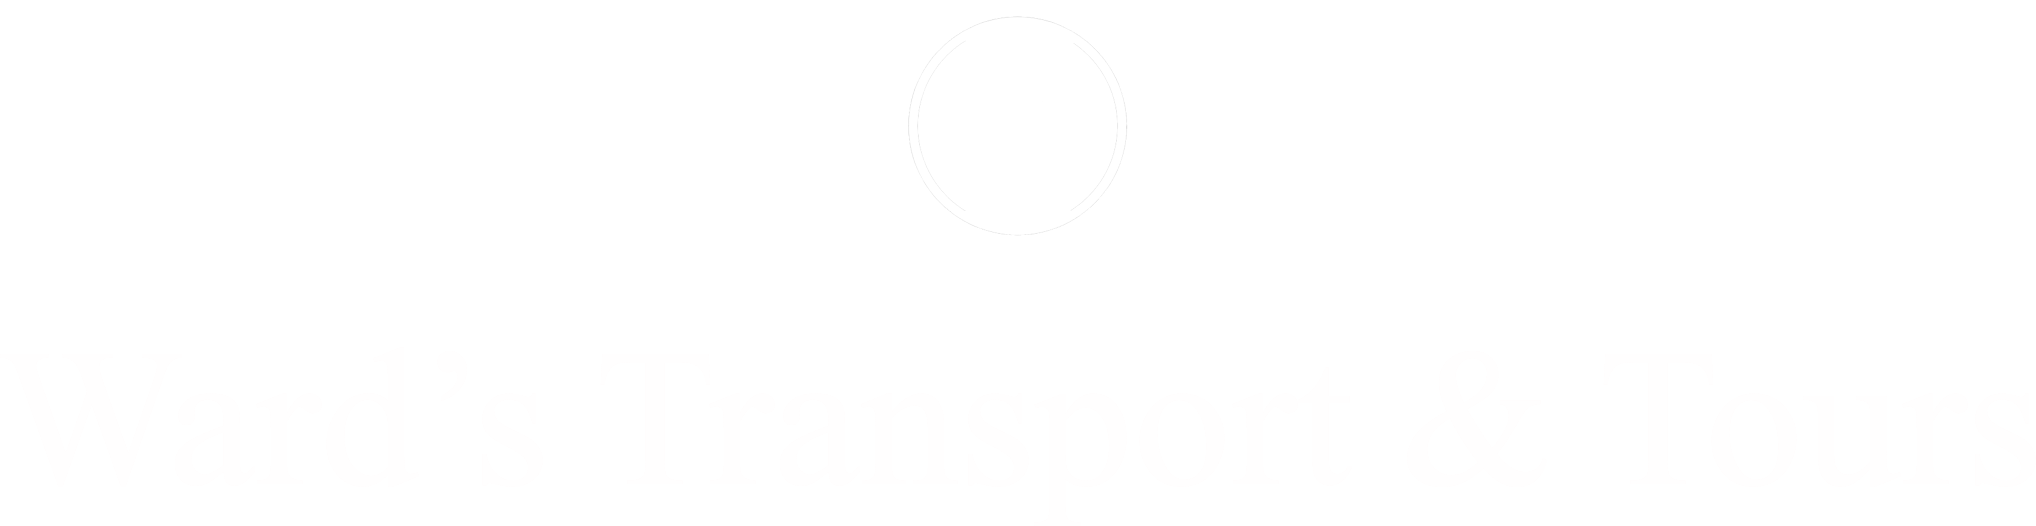 Ward's Transport and Tours Services